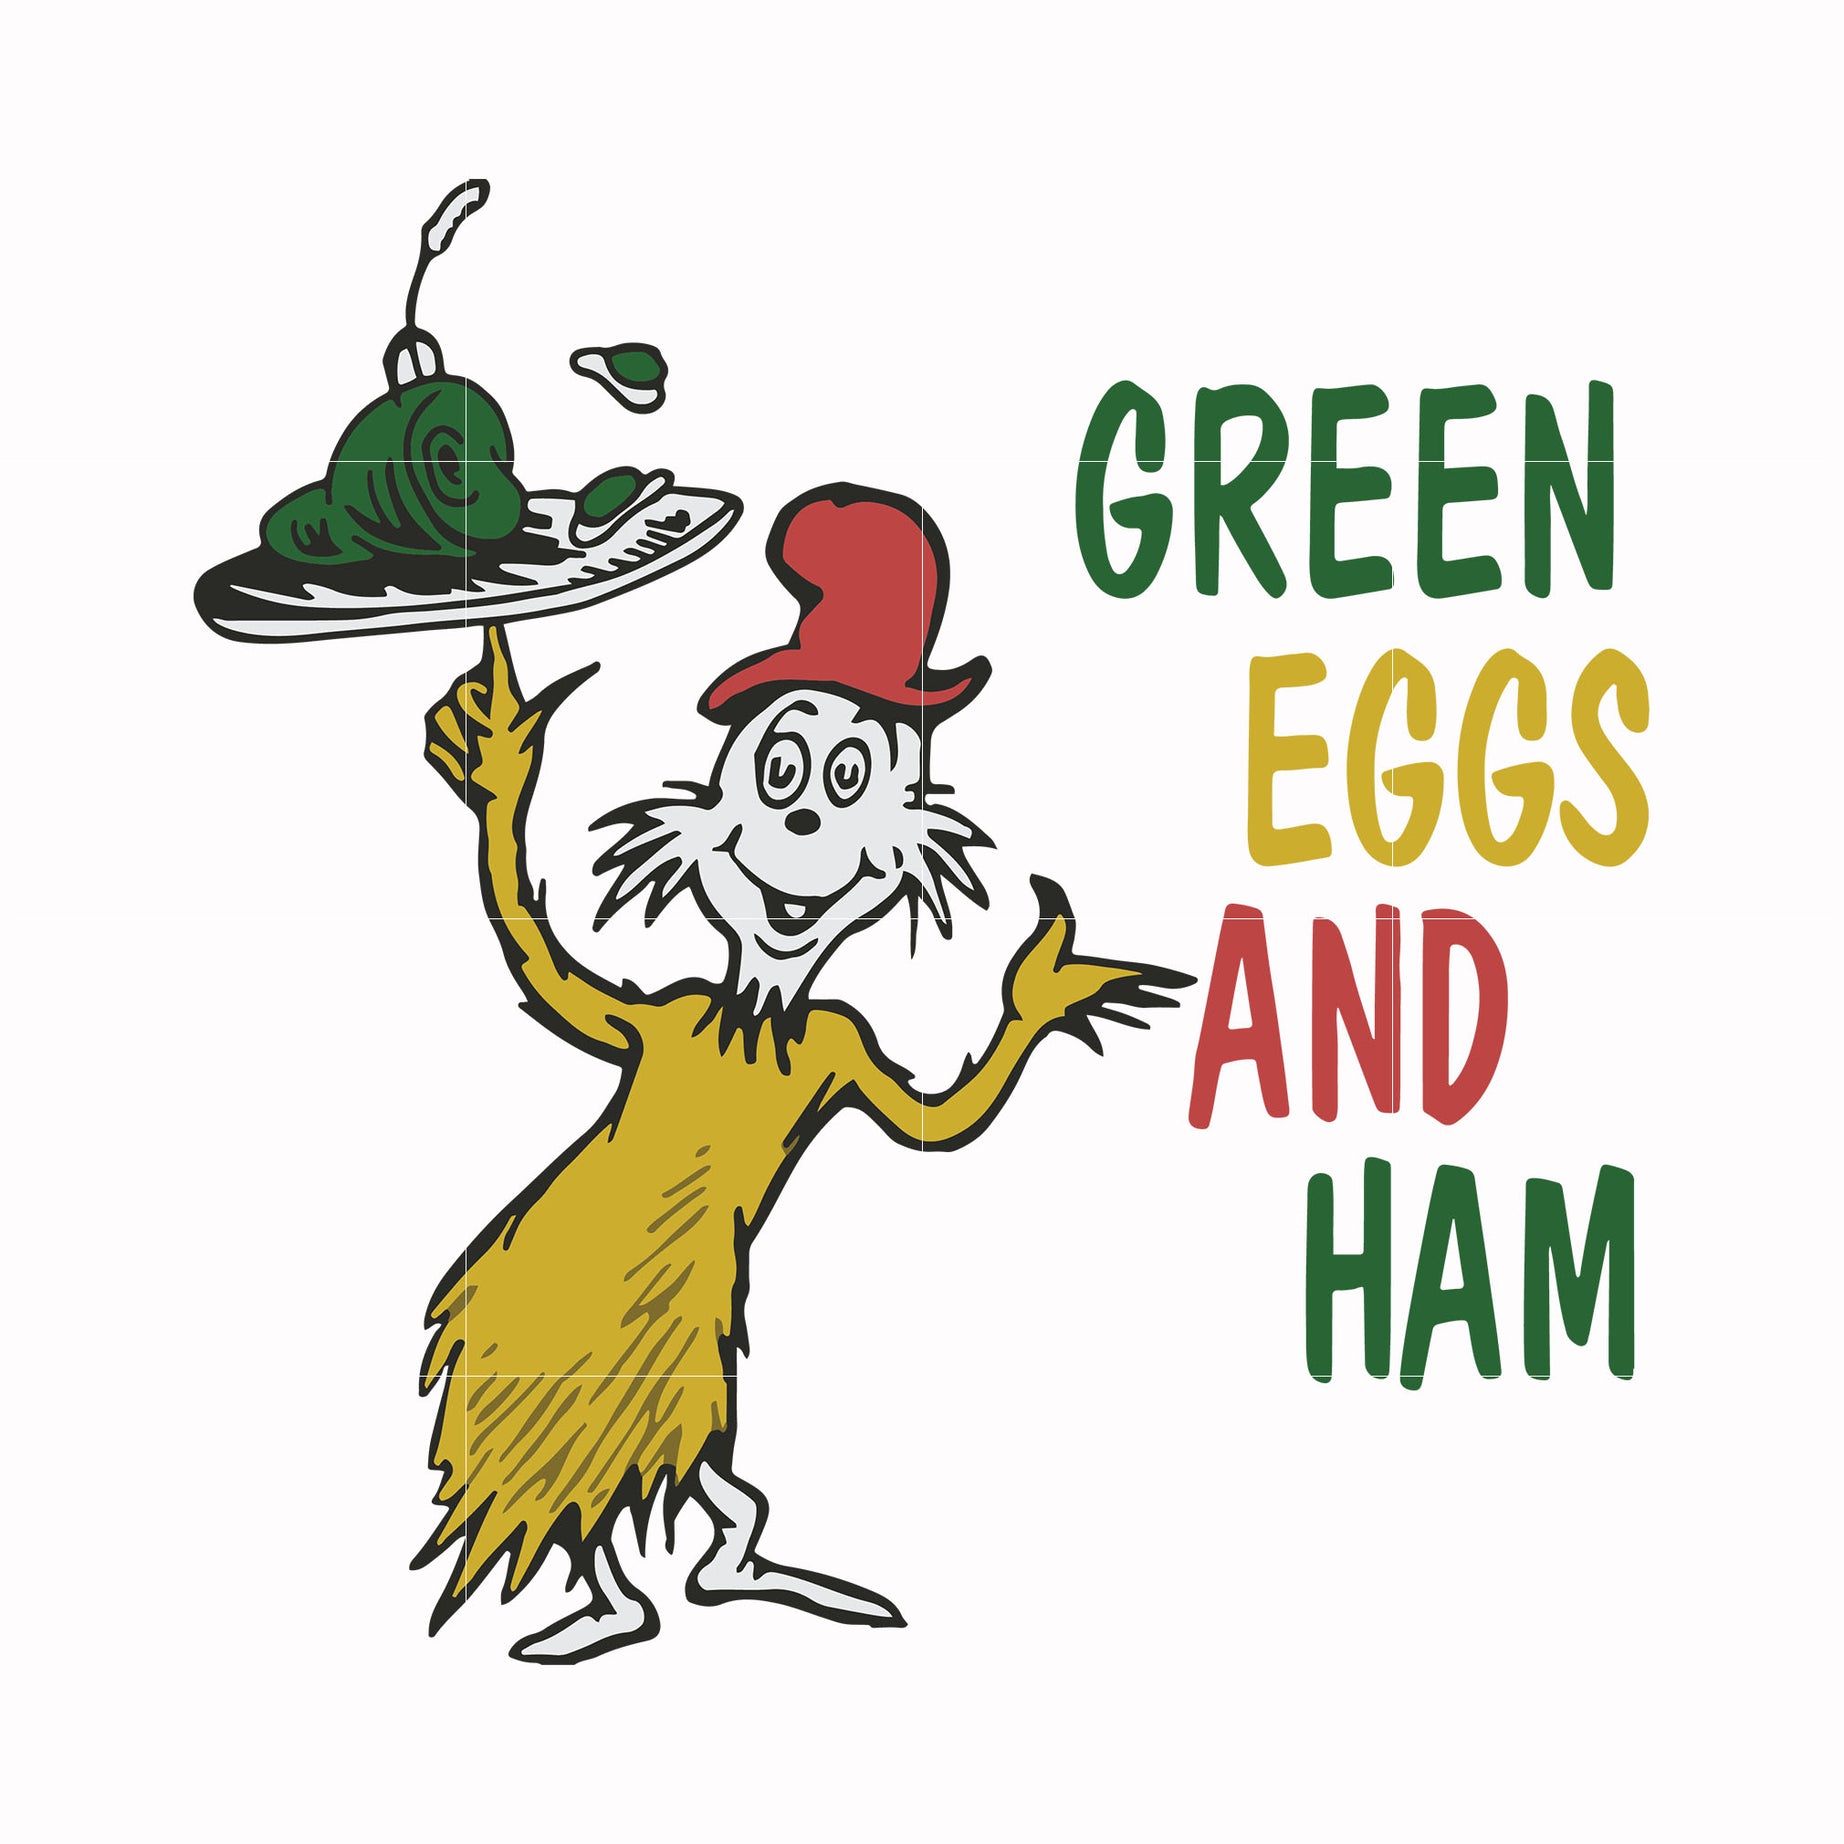 Green eggs and ham svg, png, dxf, eps file DR000126 – DreamSVG Store